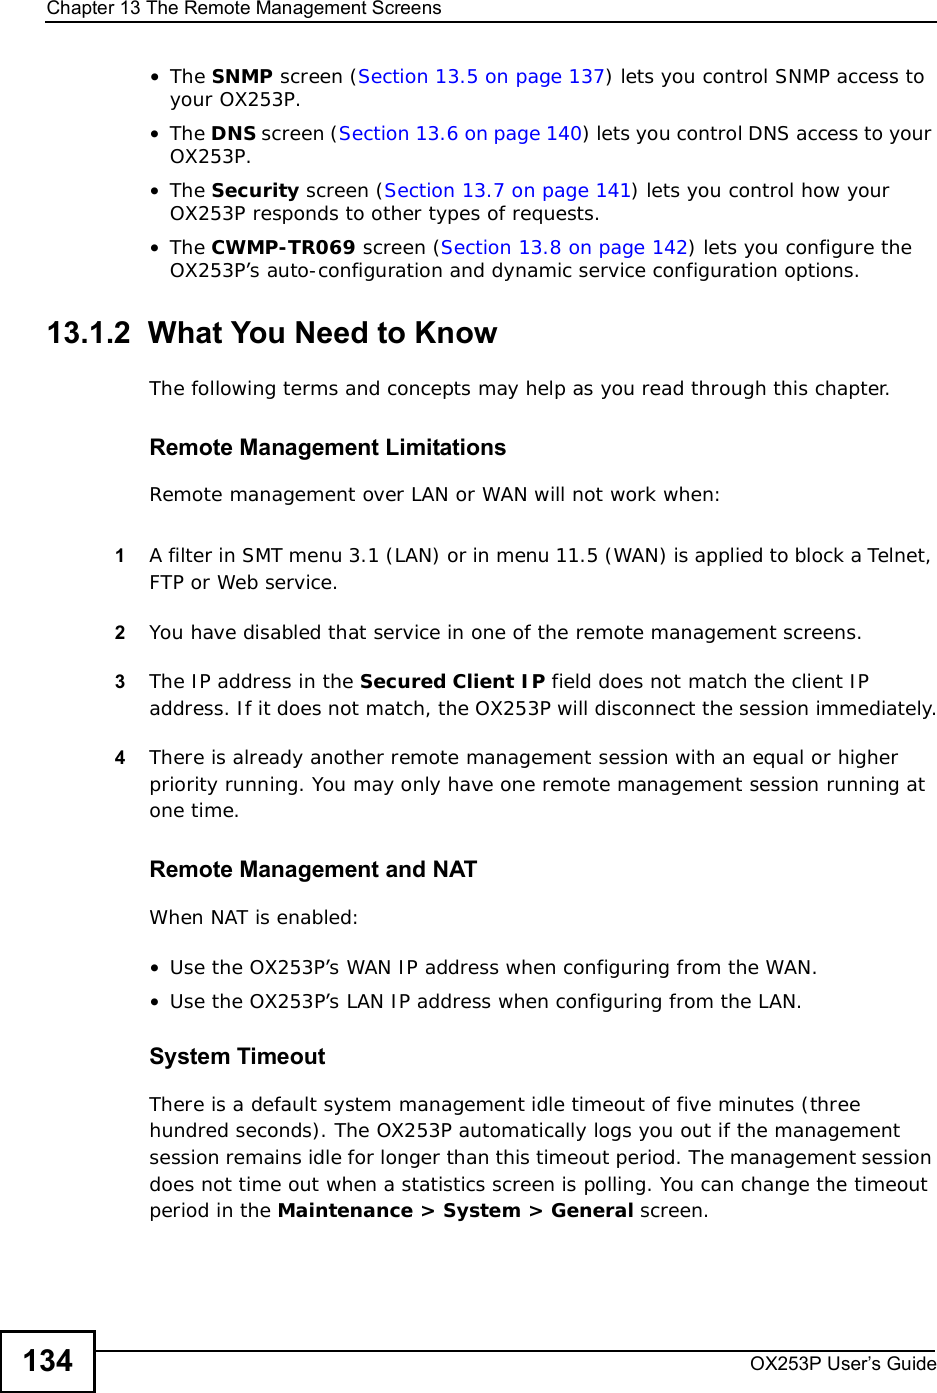 Chapter 13The Remote Management ScreensOX253P User’s Guide134•The SNMP screen (Section 13.5 on page 137) lets you control SNMP access to your OX253P.•The DNS screen (Section 13.6 on page 140) lets you control DNS access to your OX253P.•The Security screen (Section 13.7 on page 141) lets you control how your OX253P responds to other types of requests.•The CWMP-TR069 screen (Section 13.8 on page 142) lets you configure the OX253P’s auto-configuration and dynamic service configuration options.13.1.2  What You Need to KnowThe following terms and concepts may help as you read through this chapter.Remote Management LimitationsRemote management over LAN or WAN will not work when:1A filter in SMT menu 3.1 (LAN) or in menu 11.5 (WAN) is applied to block a Telnet, FTP or Web service. 2You have disabled that service in one of the remote management screens.3The IP address in the Secured Client IP field does not match the client IP address. If it does not match, the OX253P will disconnect the session immediately.4There is already another remote management session with an equal or higher priority running. You may only have one remote management session running at one time.Remote Management and NATWhen NAT is enabled:•Use the OX253P’s WAN IP address when configuring from the WAN. •Use the OX253P’s LAN IP address when configuring from the LAN.System TimeoutThere is a default system management idle timeout of five minutes (three hundred seconds). The OX253P automatically logs you out if the management session remains idle for longer than this timeout period. The management session does not time out when a statistics screen is polling. You can change the timeout period in the Maintenance &gt; System &gt; General screen.